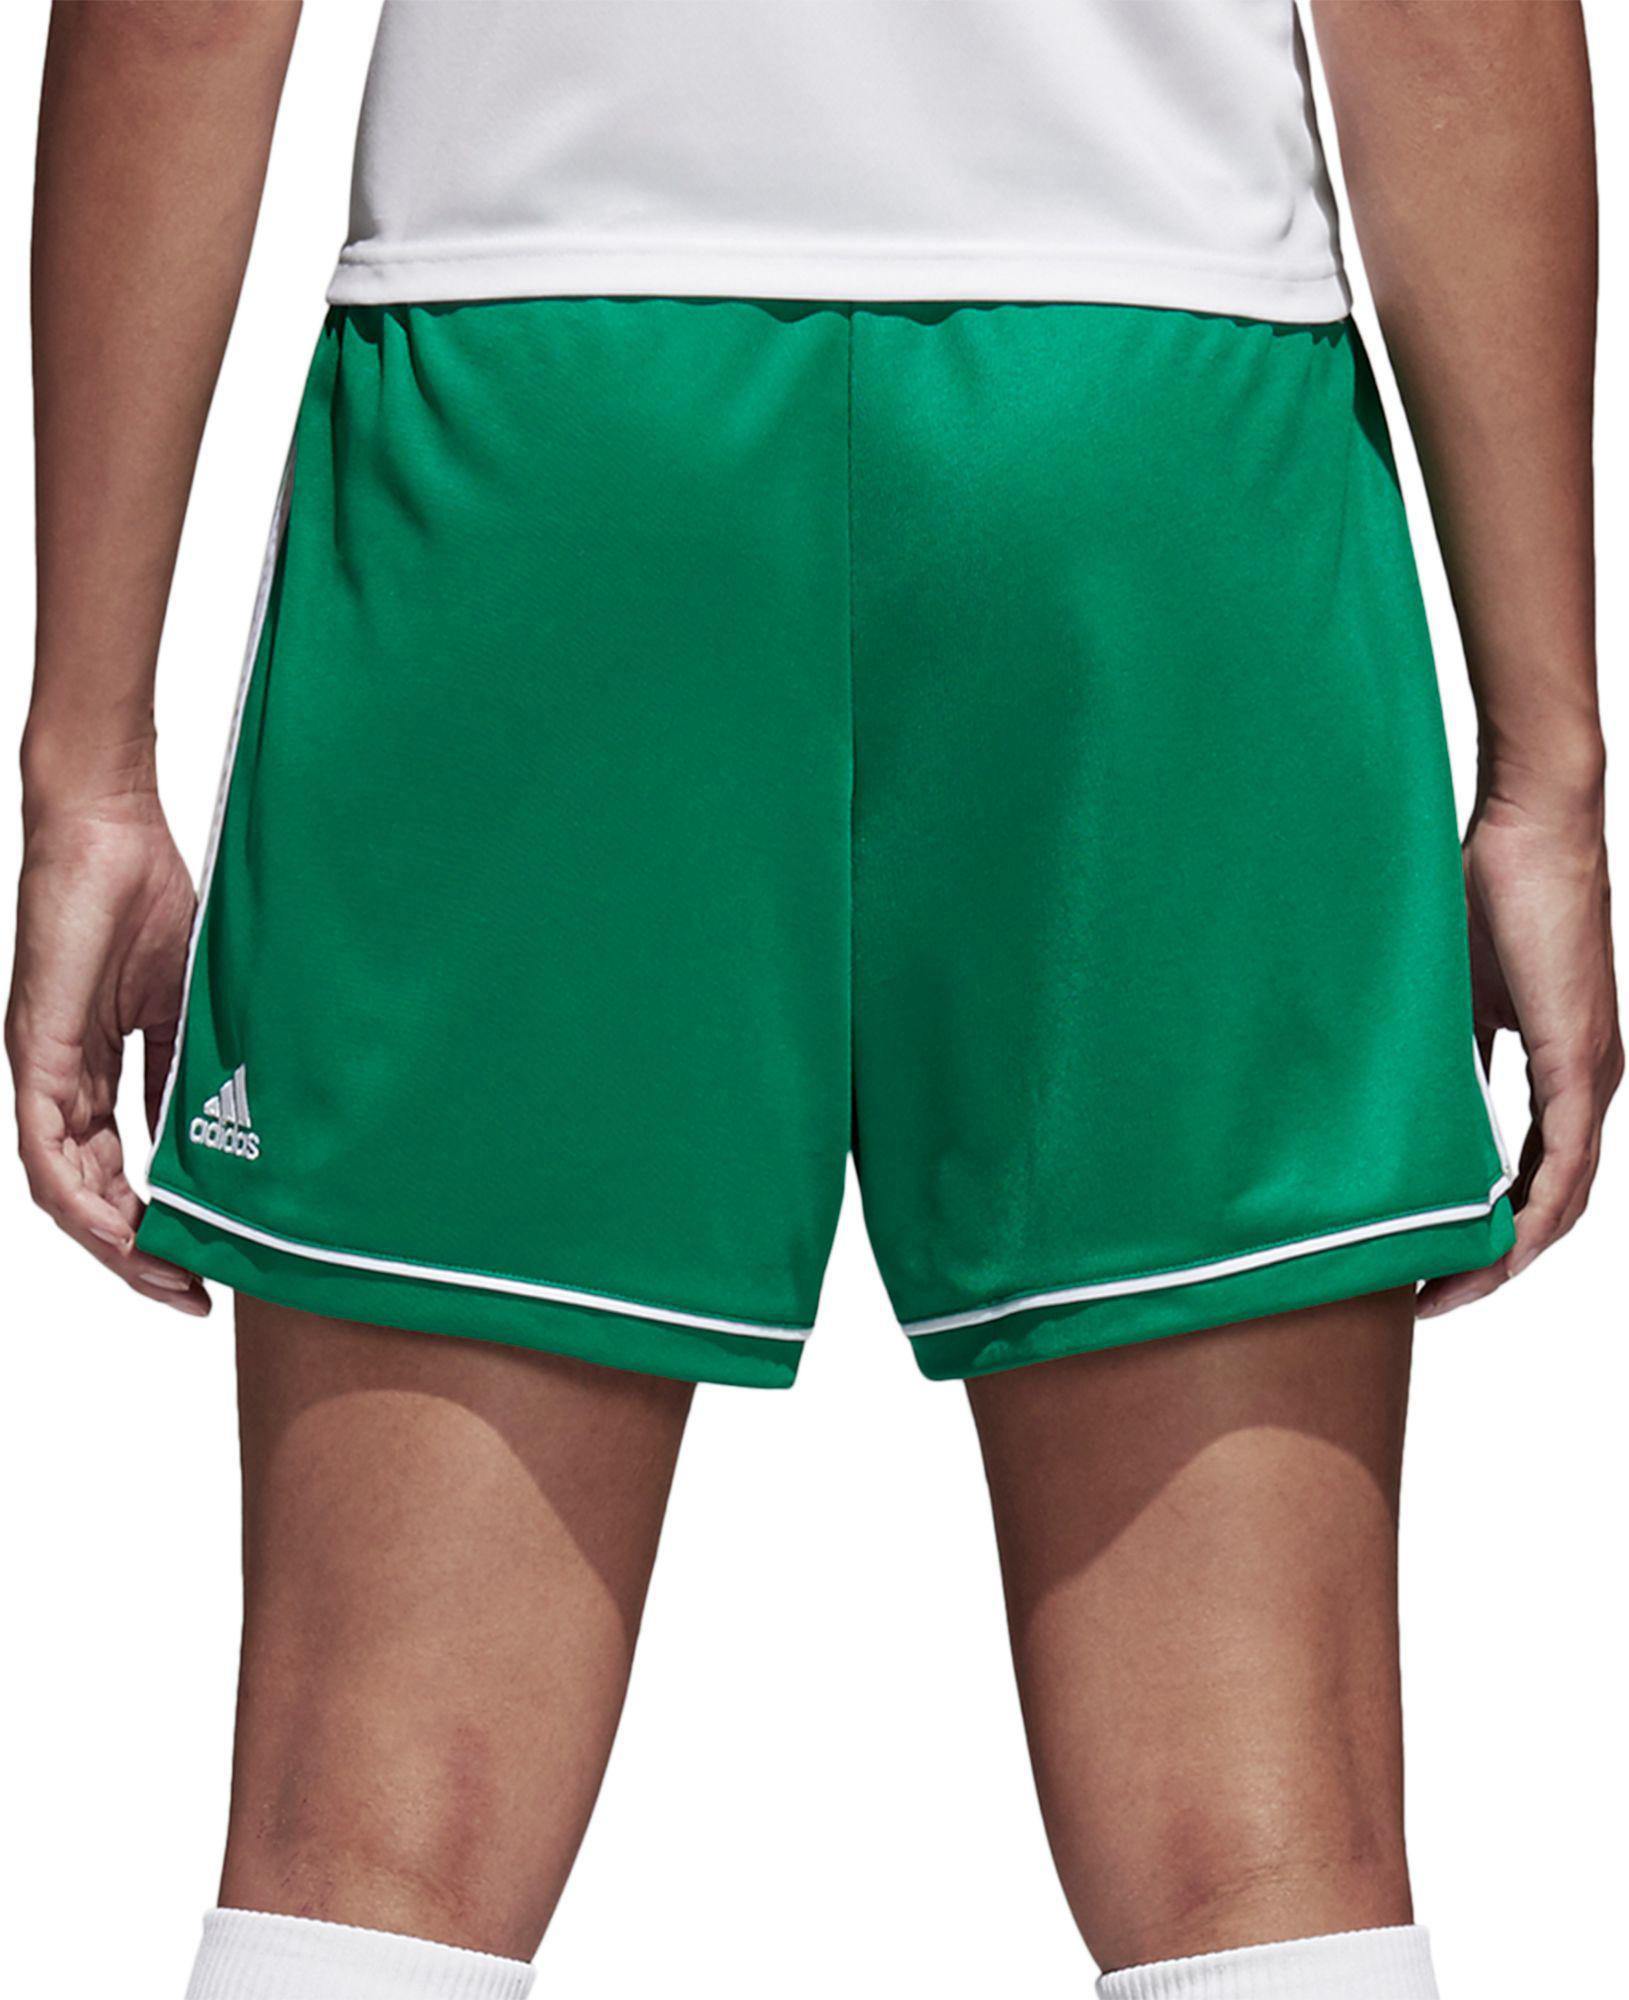 Adidas Synthetic Squadra 17 Soccer Shorts In Bright Green Green Lyst